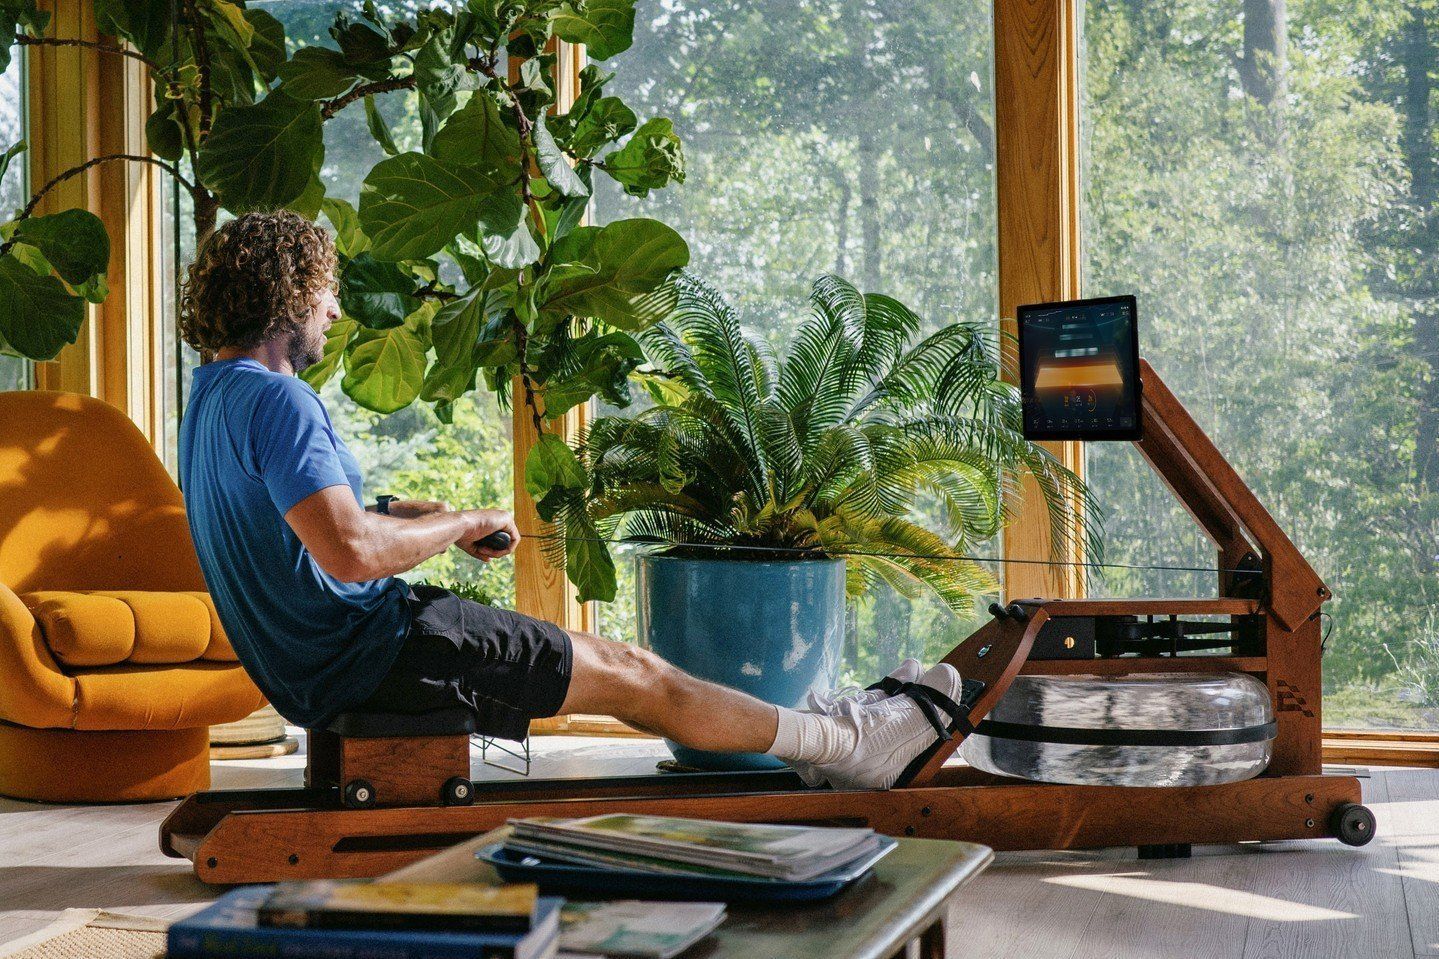 A person using egratta rower at home